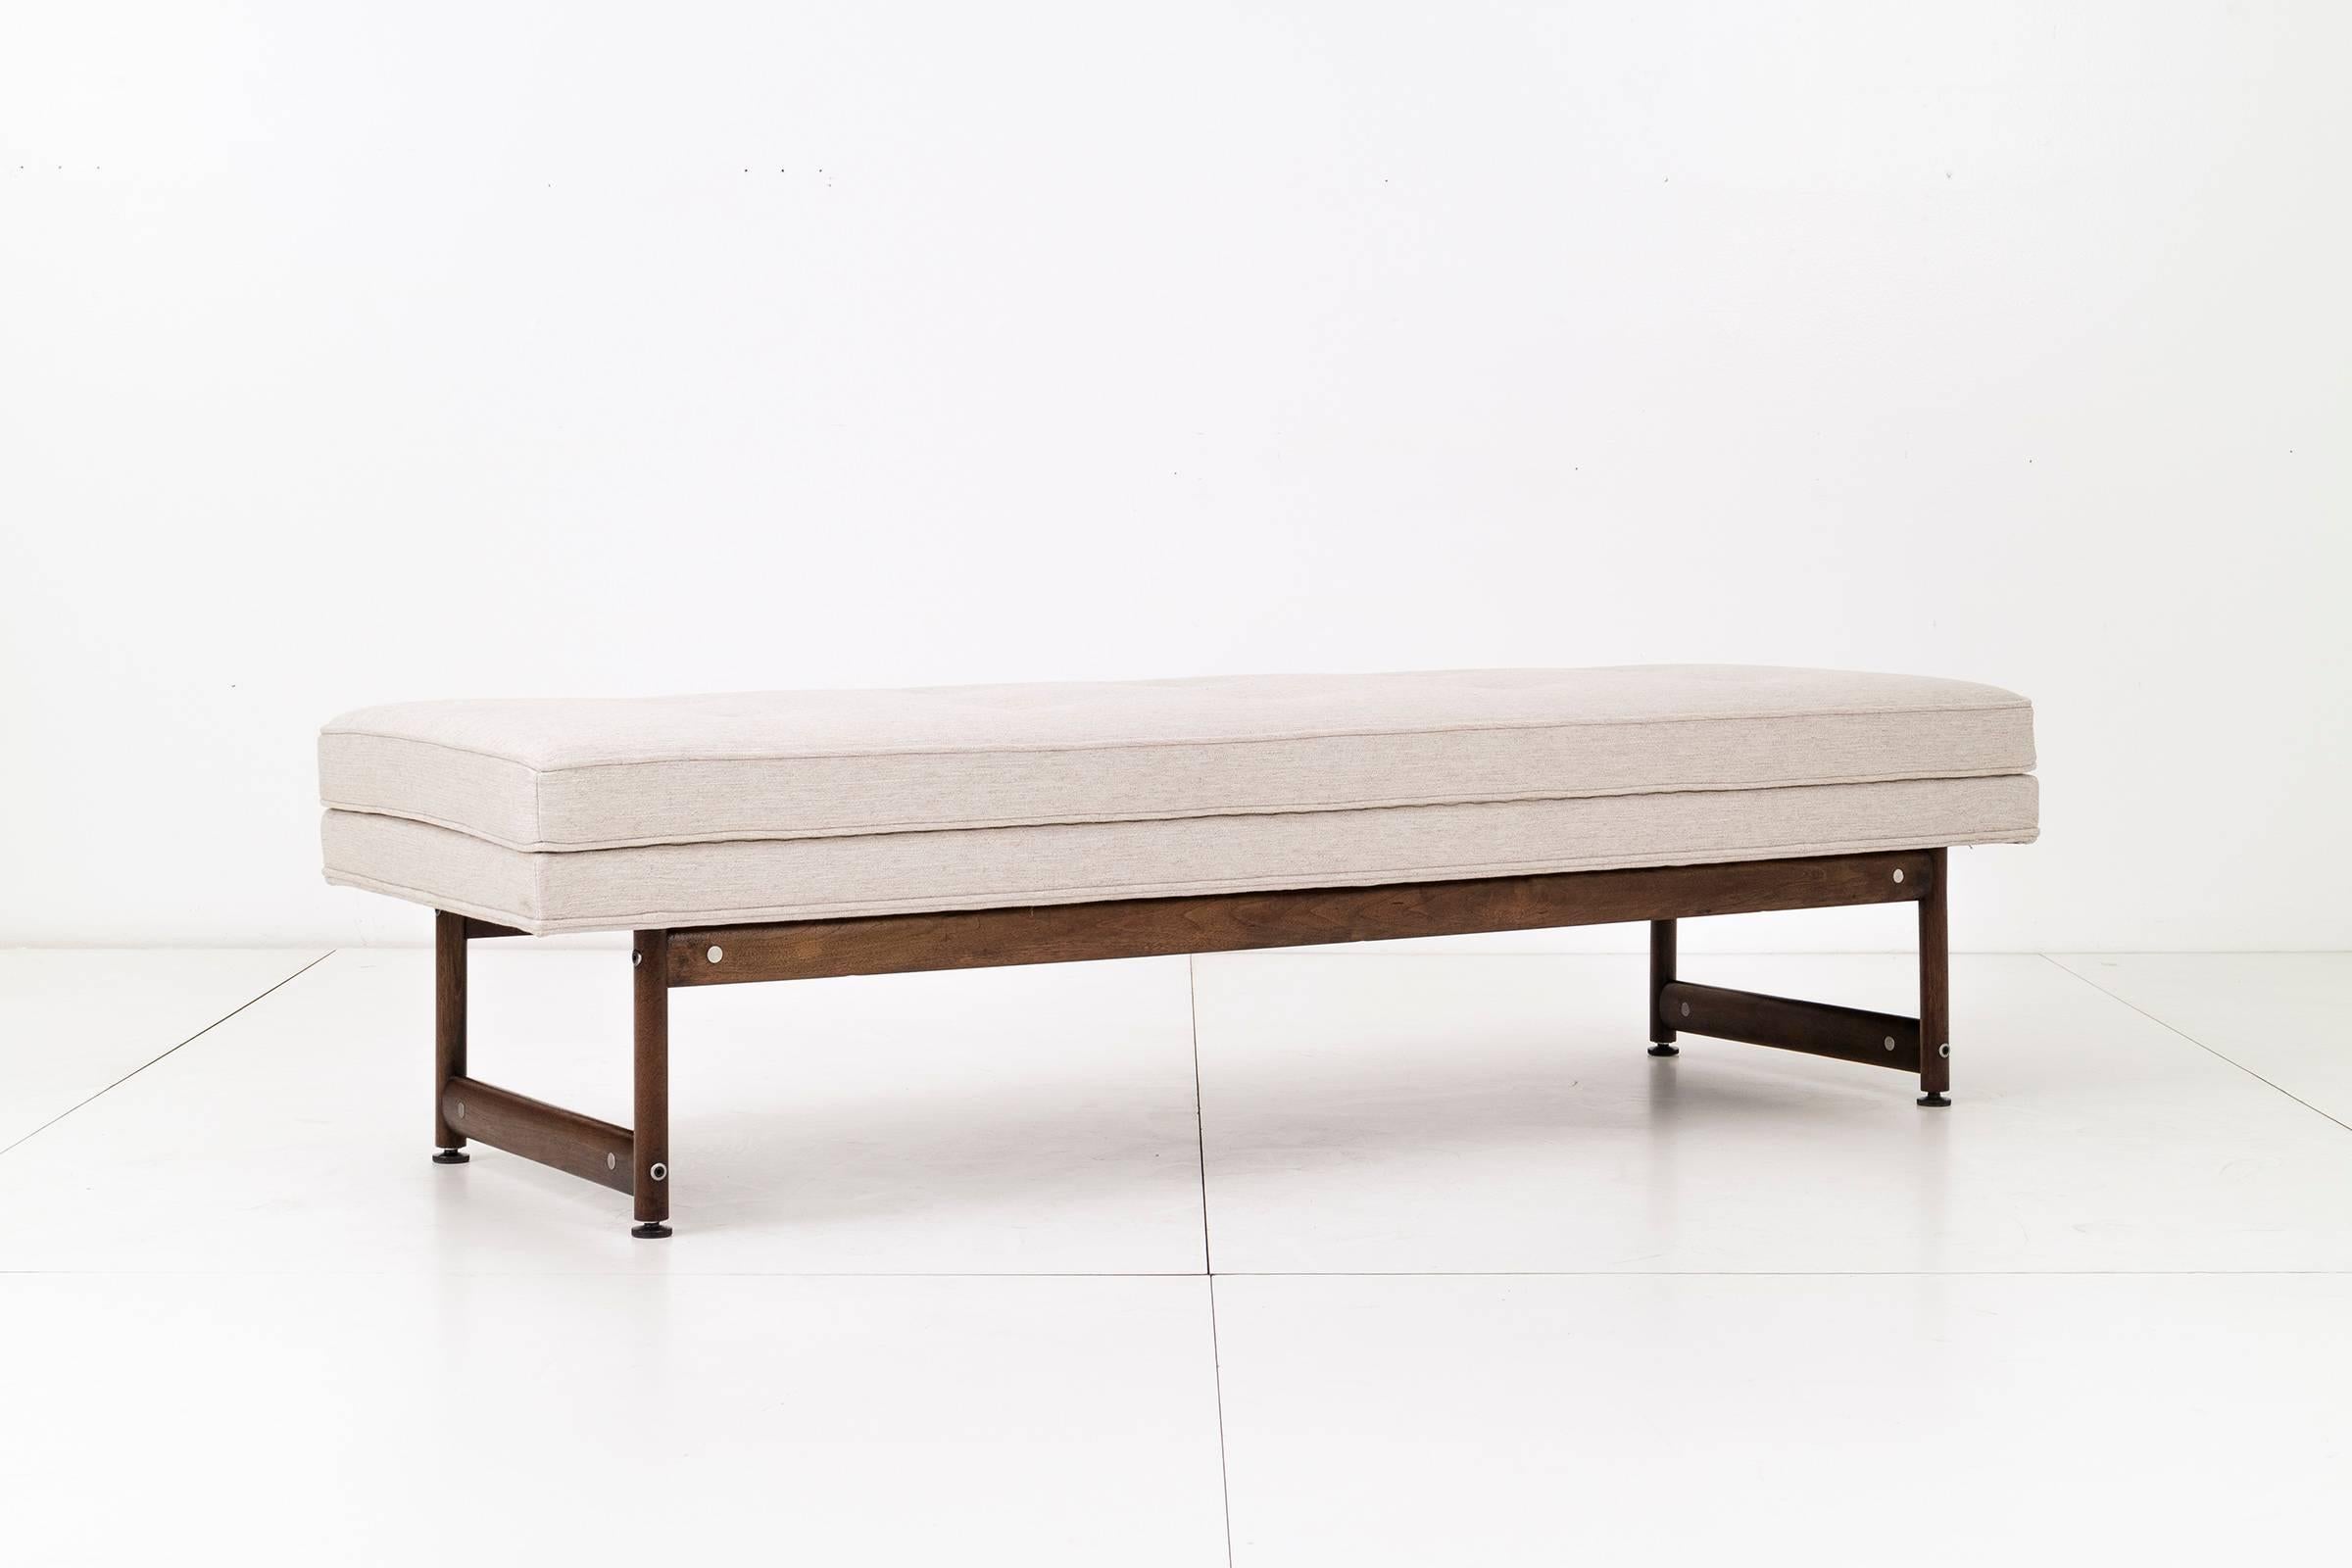 Kasparian Brothers, California modern long bench, reupholstered with great plains cotton-poly textured weave and solid oiled walnut base, metal discs highlights accent of structural joinery.

 